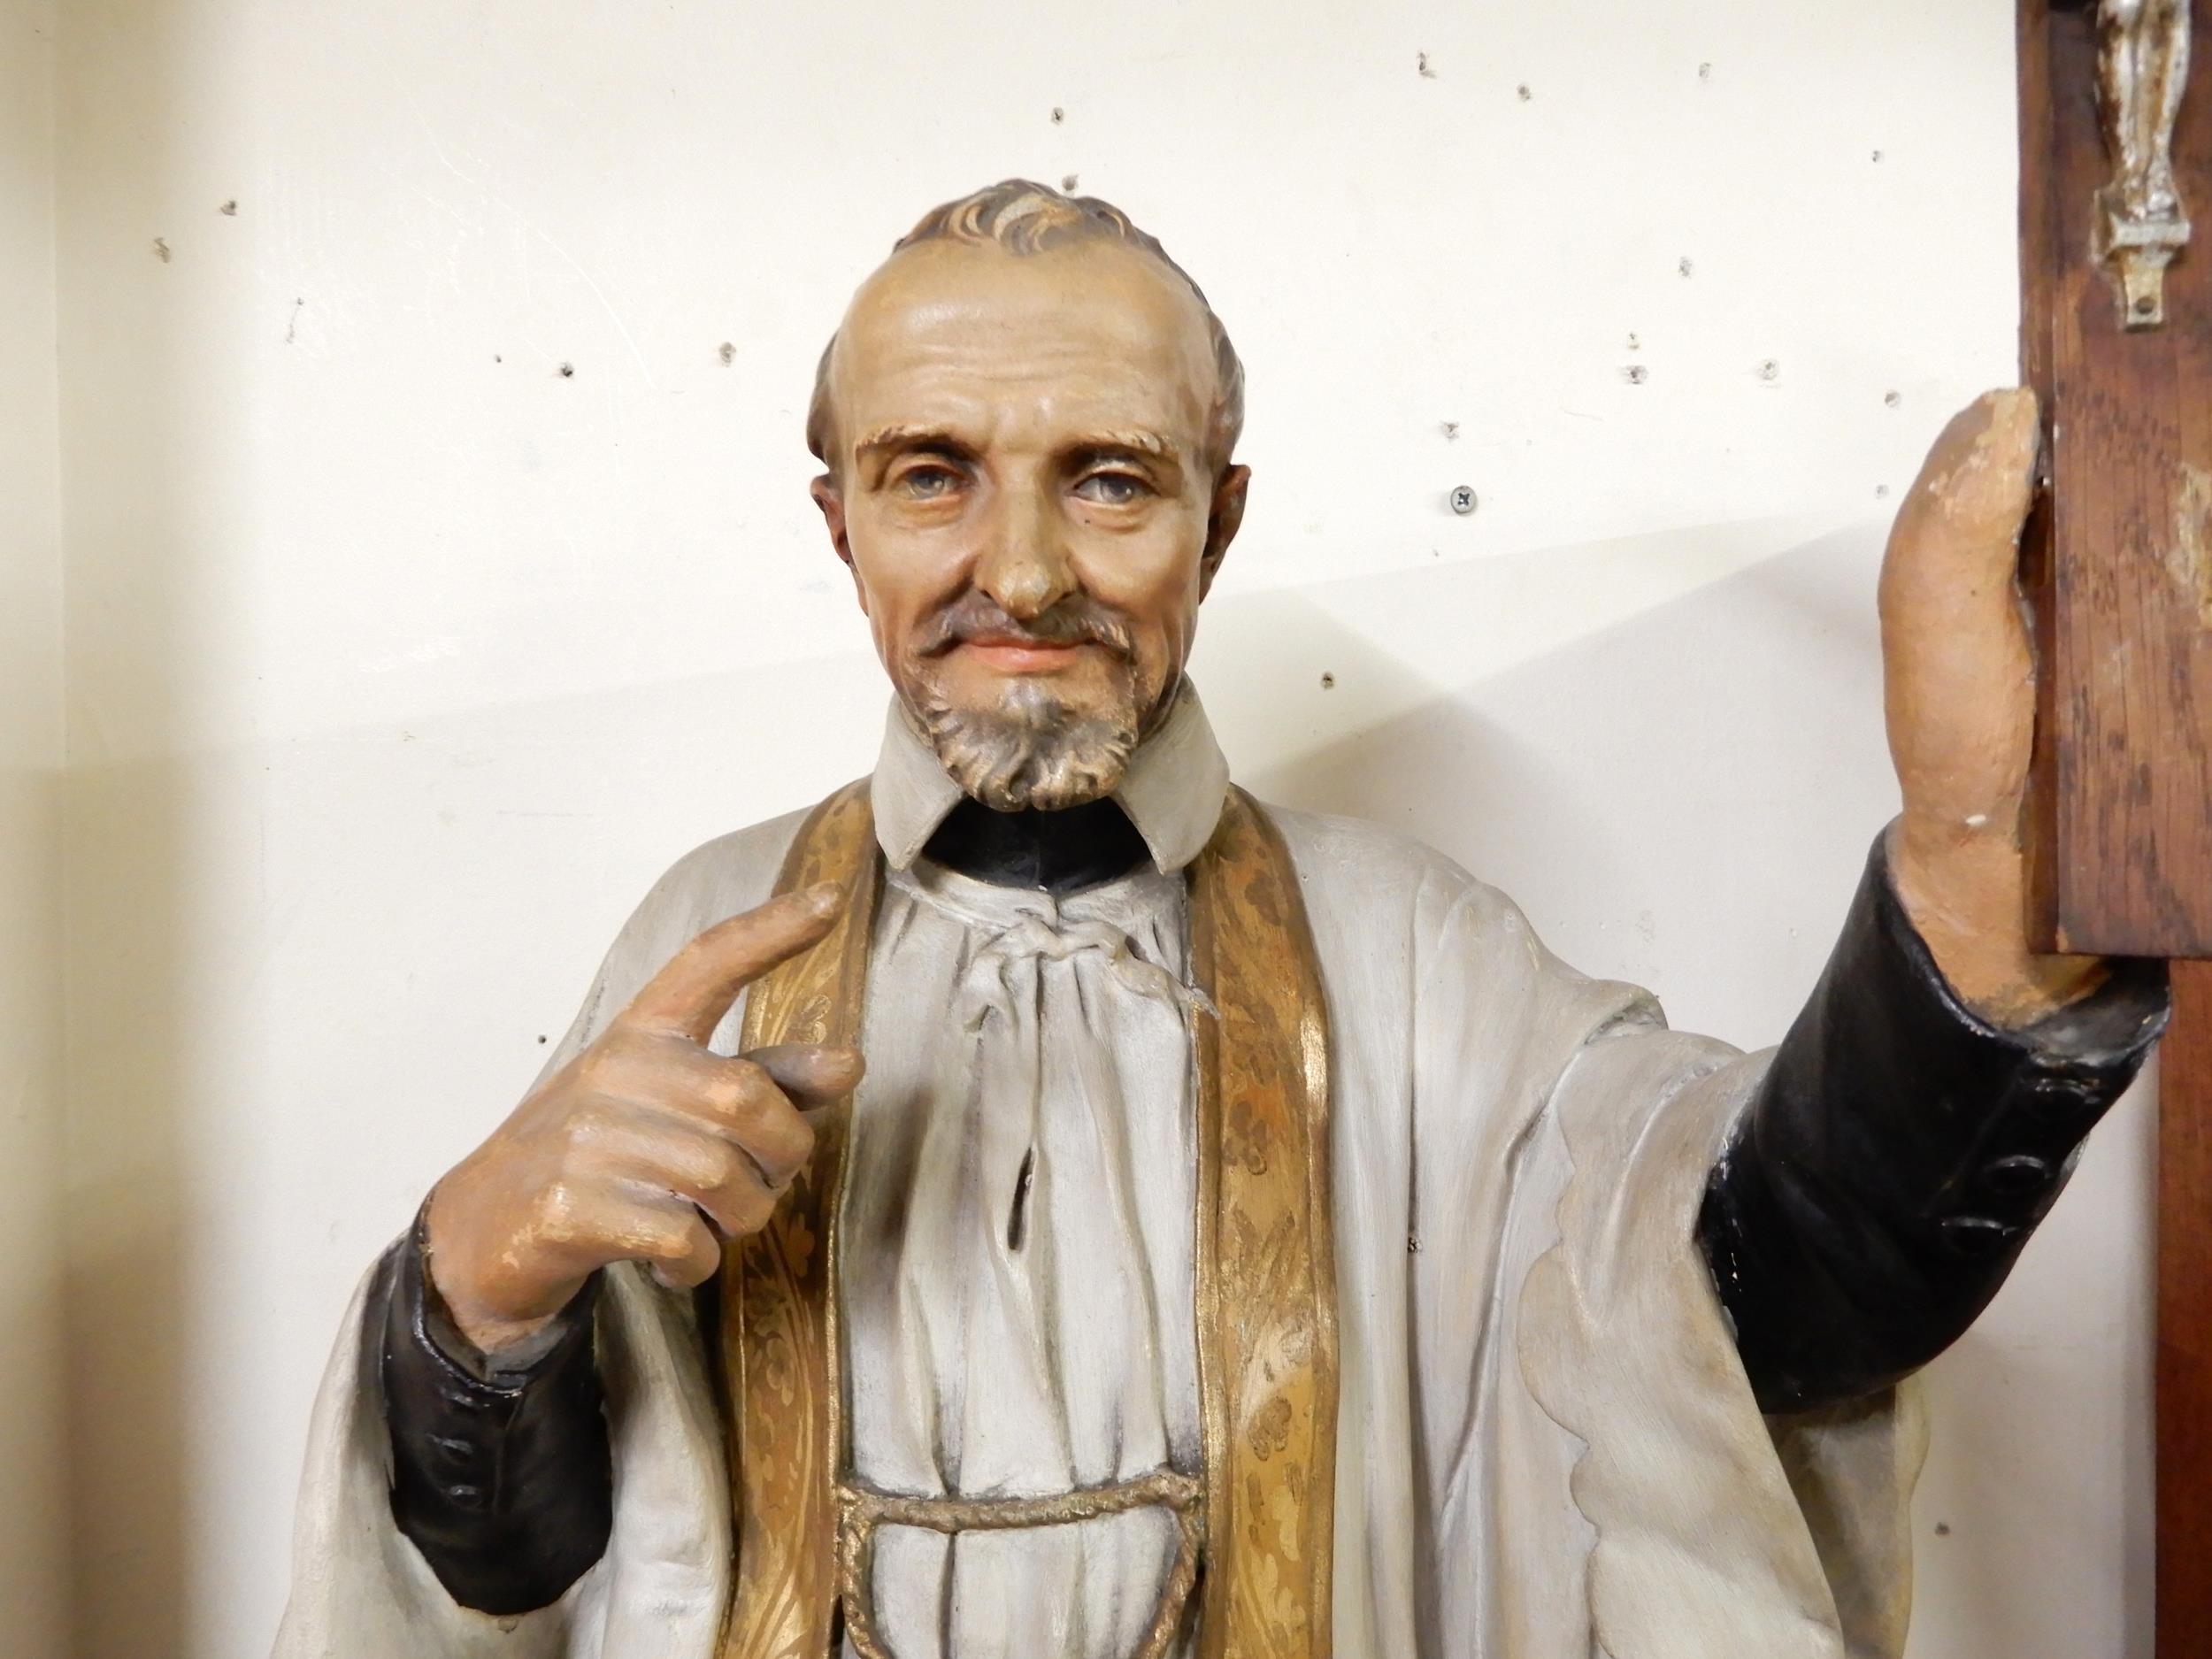 A 20th century ecclesiastical statue of Saint Francis Xavier holding up a crucifix in reverence on - Image 2 of 4